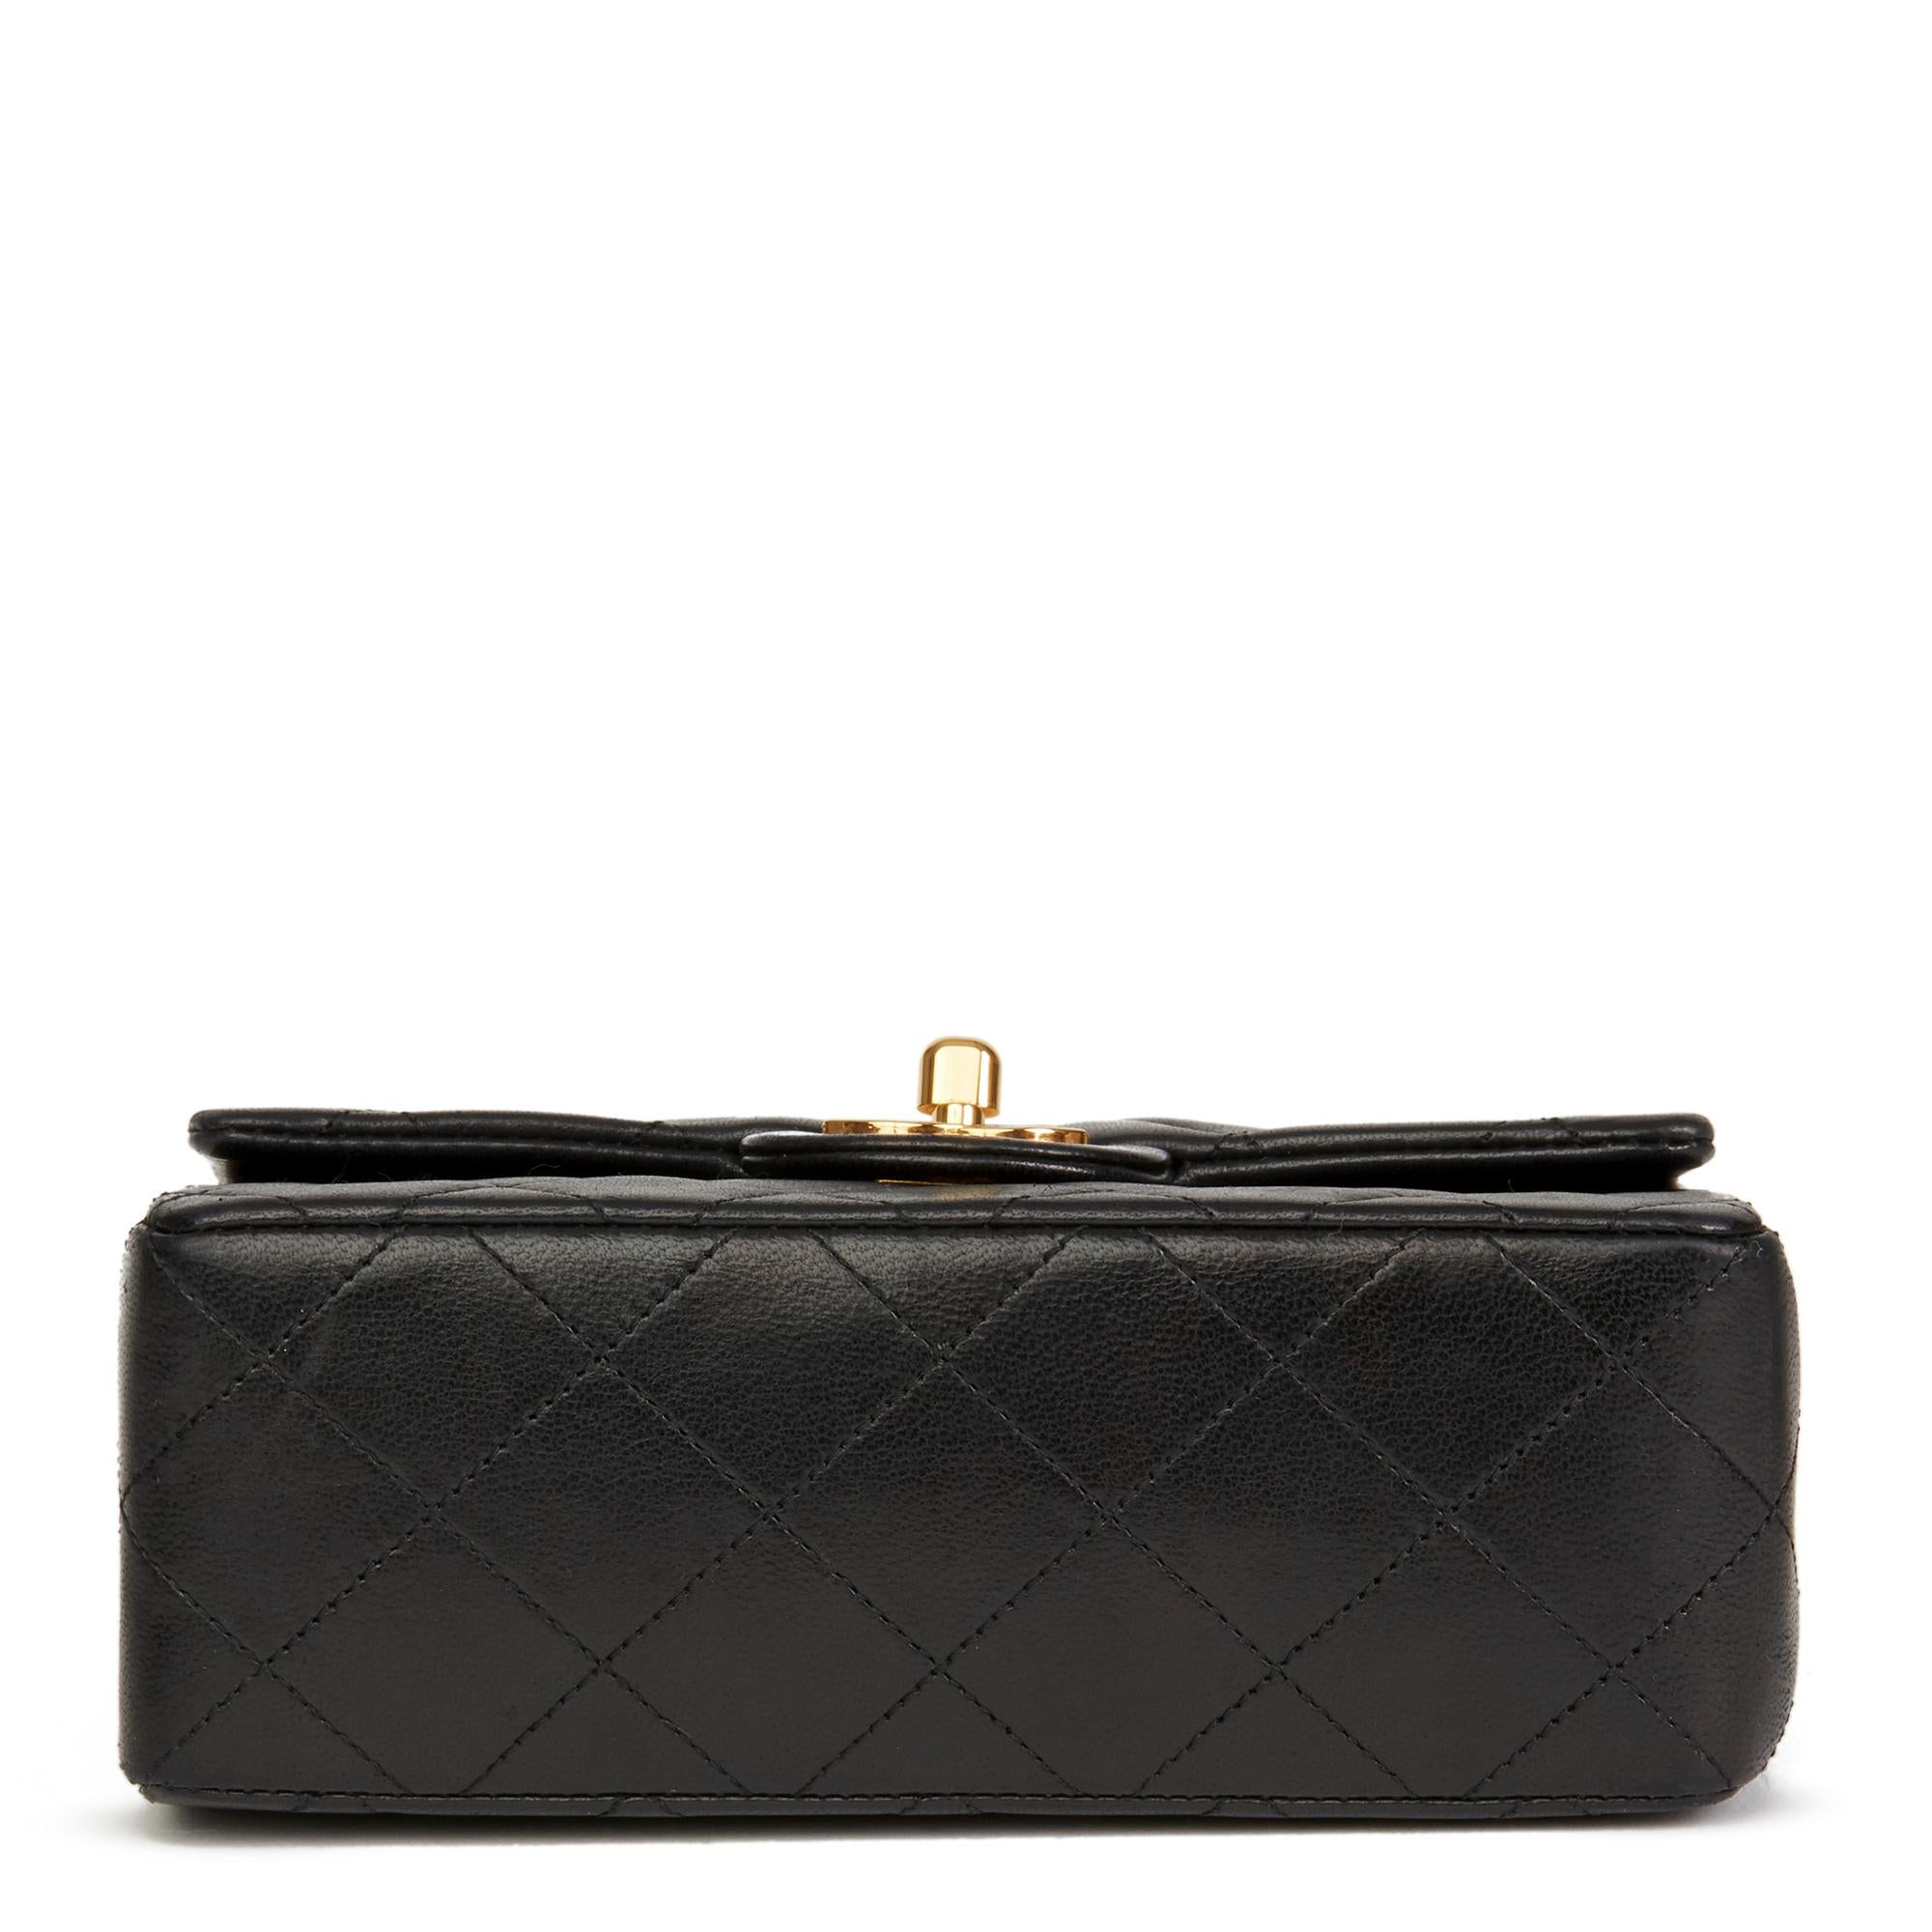 1991 Chanel Black Quilted Lambskin Vintage Mini Flap Bag 1